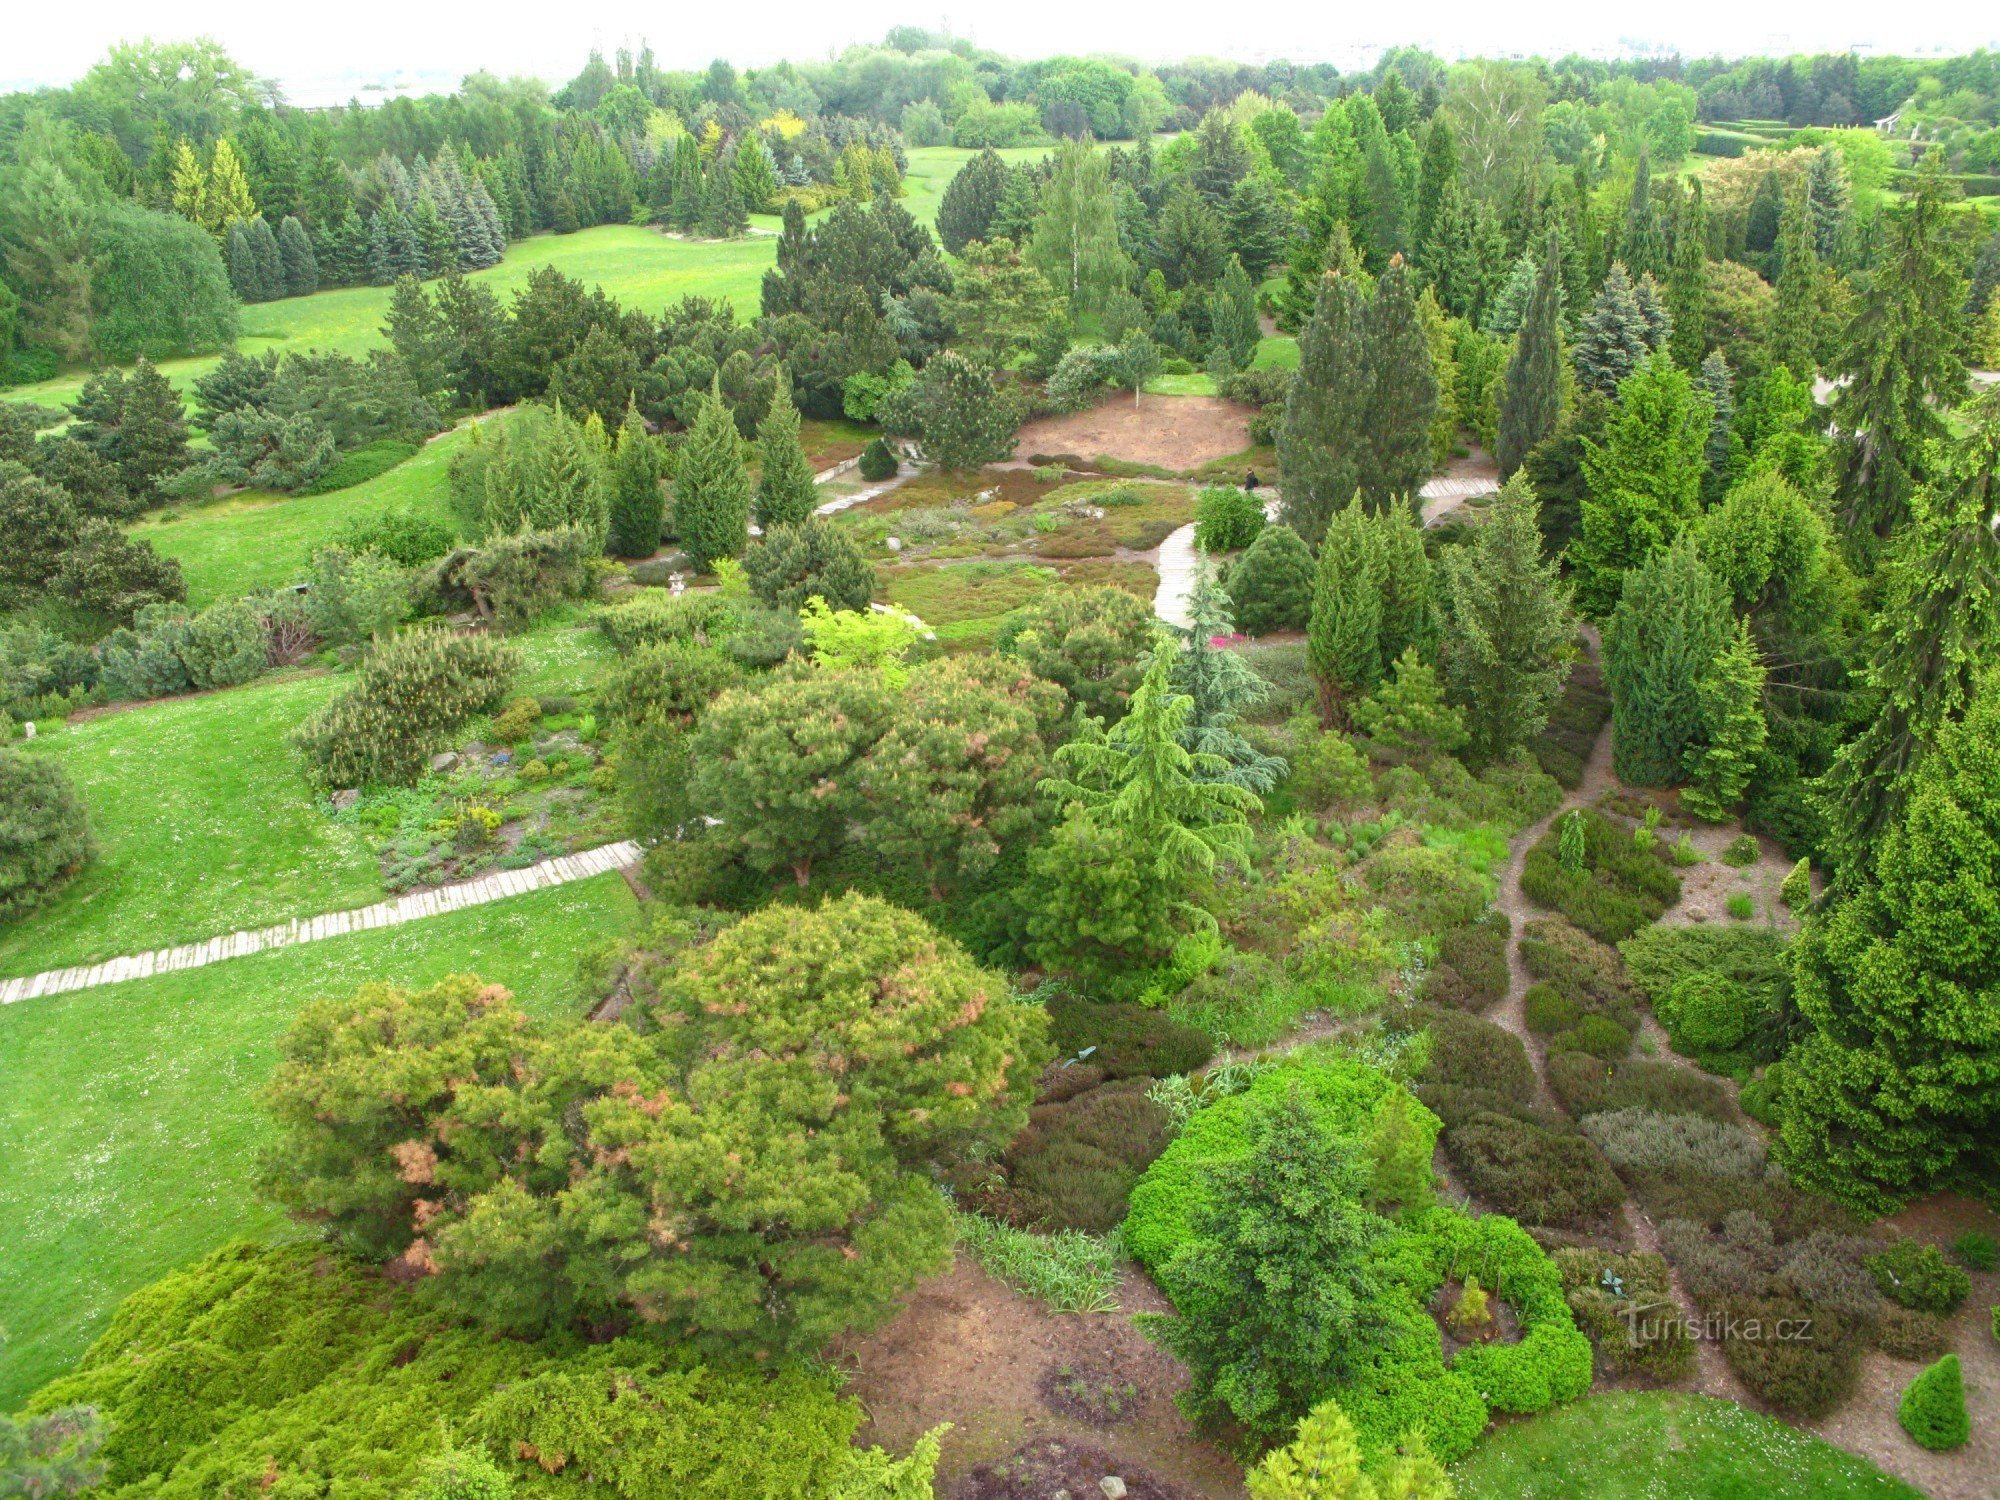 Dendrological garden from a height of 2